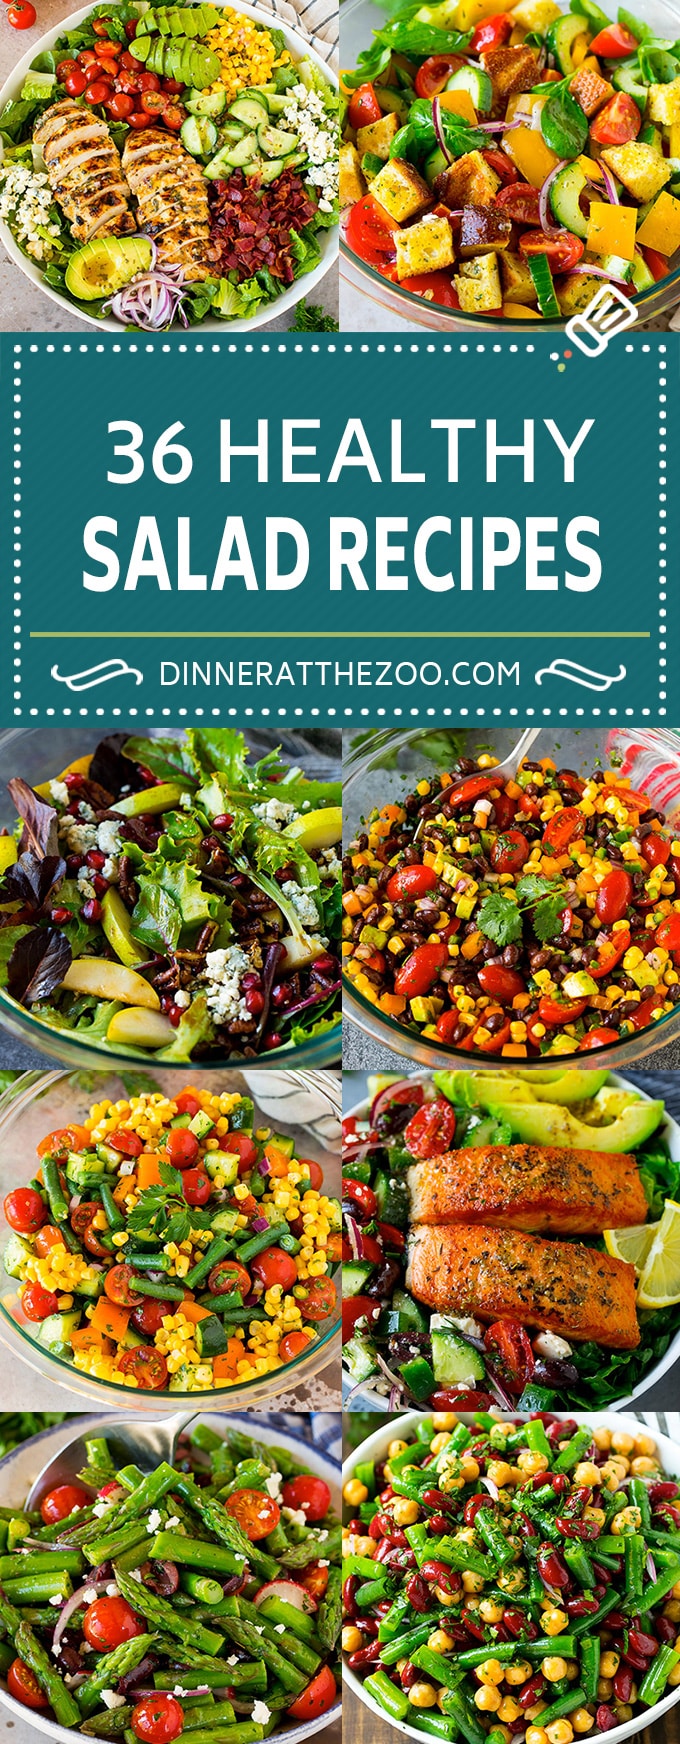 36 Healthy Salad Recipes - Dinner at the Zoo